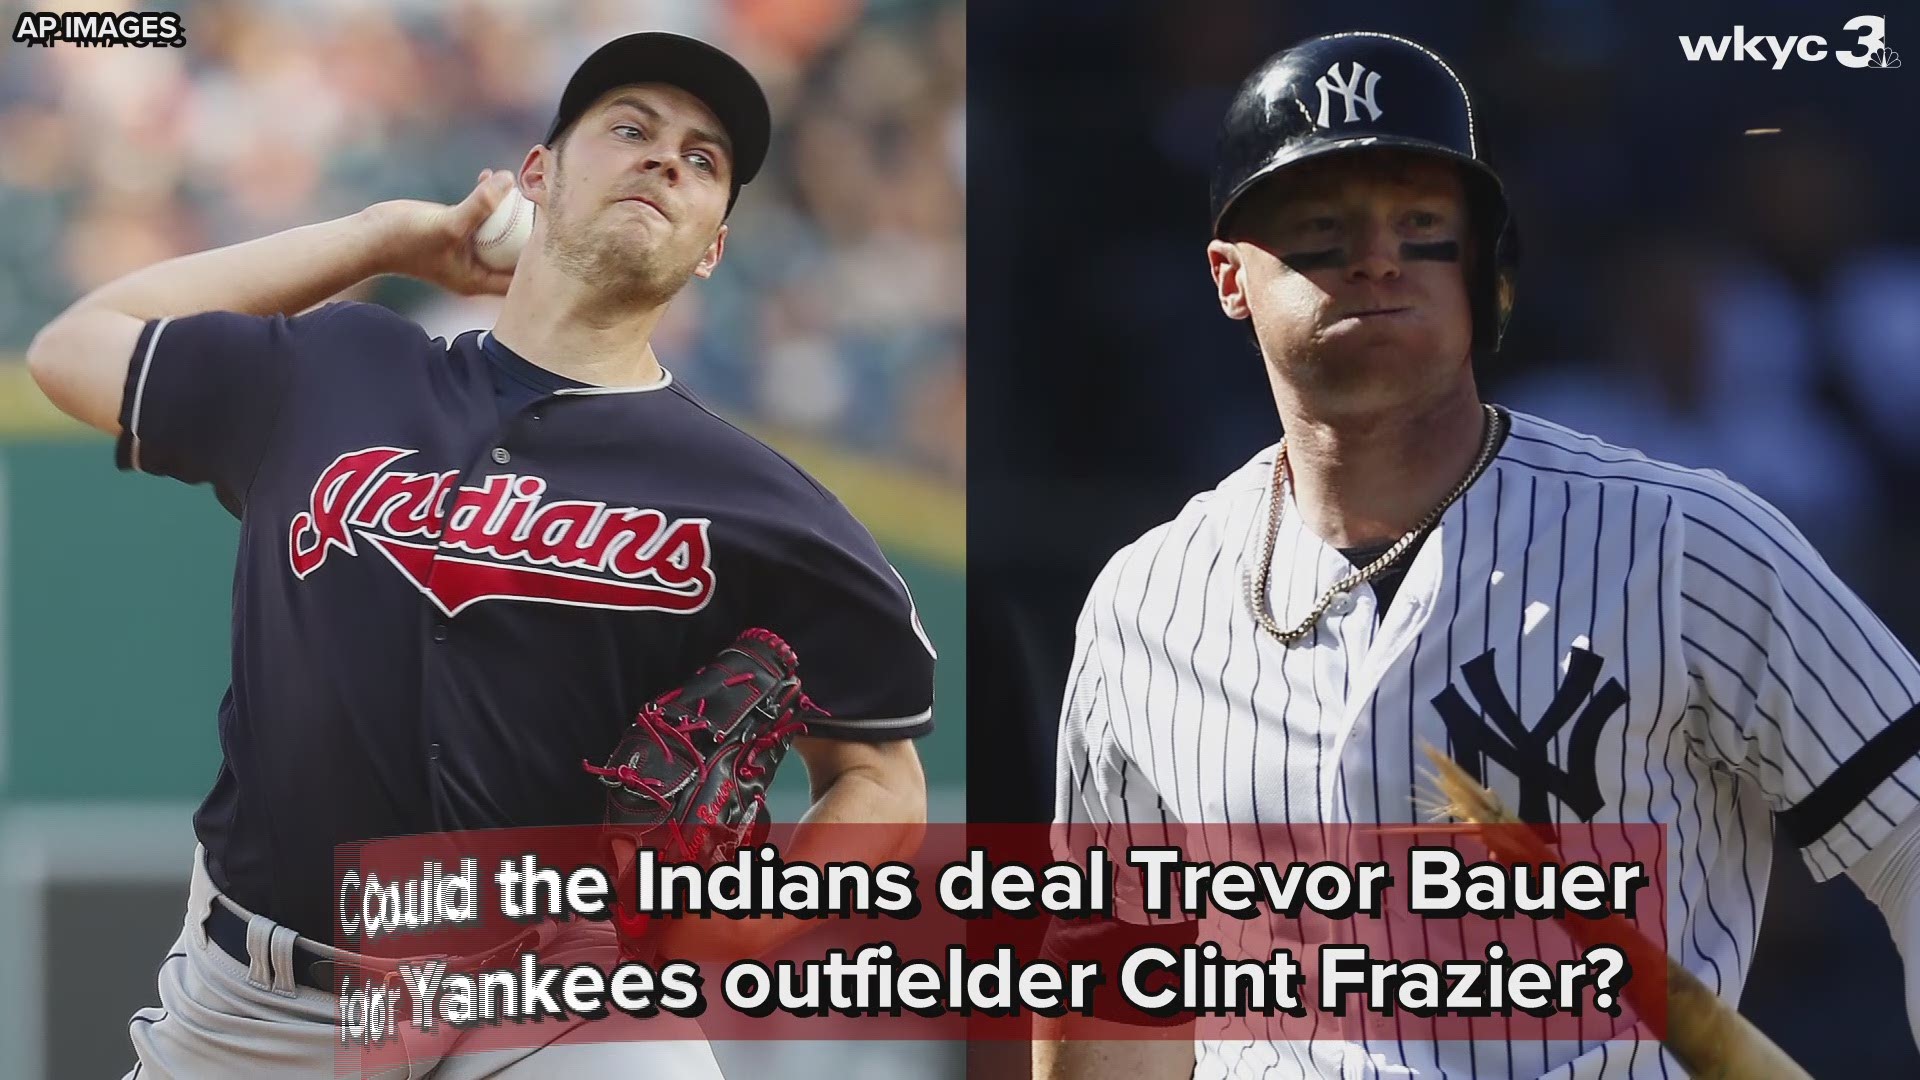 Could Cleveland Indians deal Trevor Bauer for Yankees outfielder